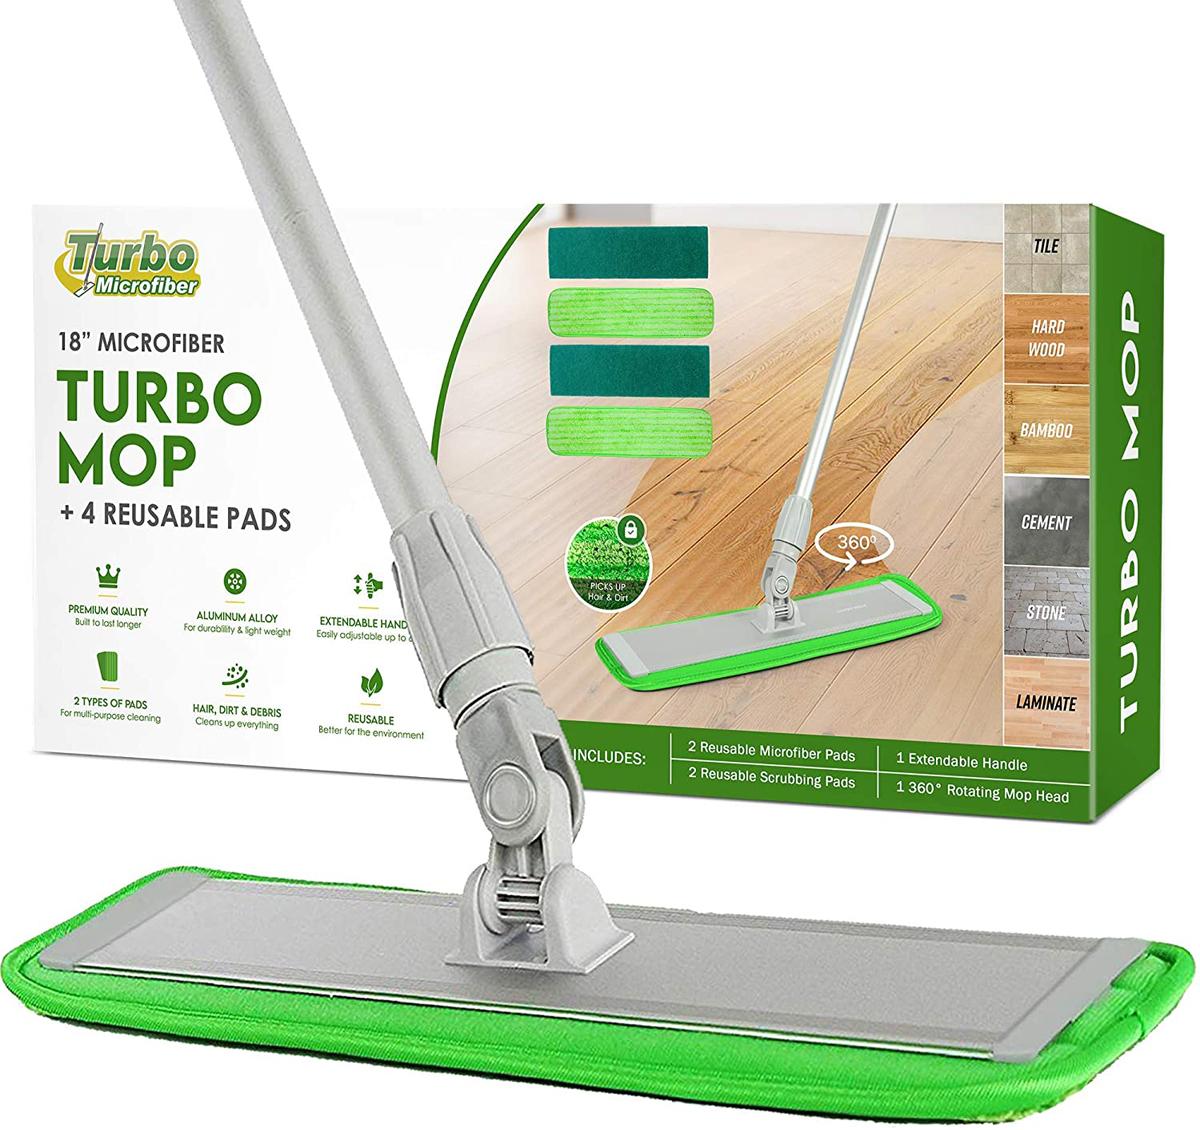 Turbo Microfiber Mop Floor Cleaning System for $28.49 Shipped